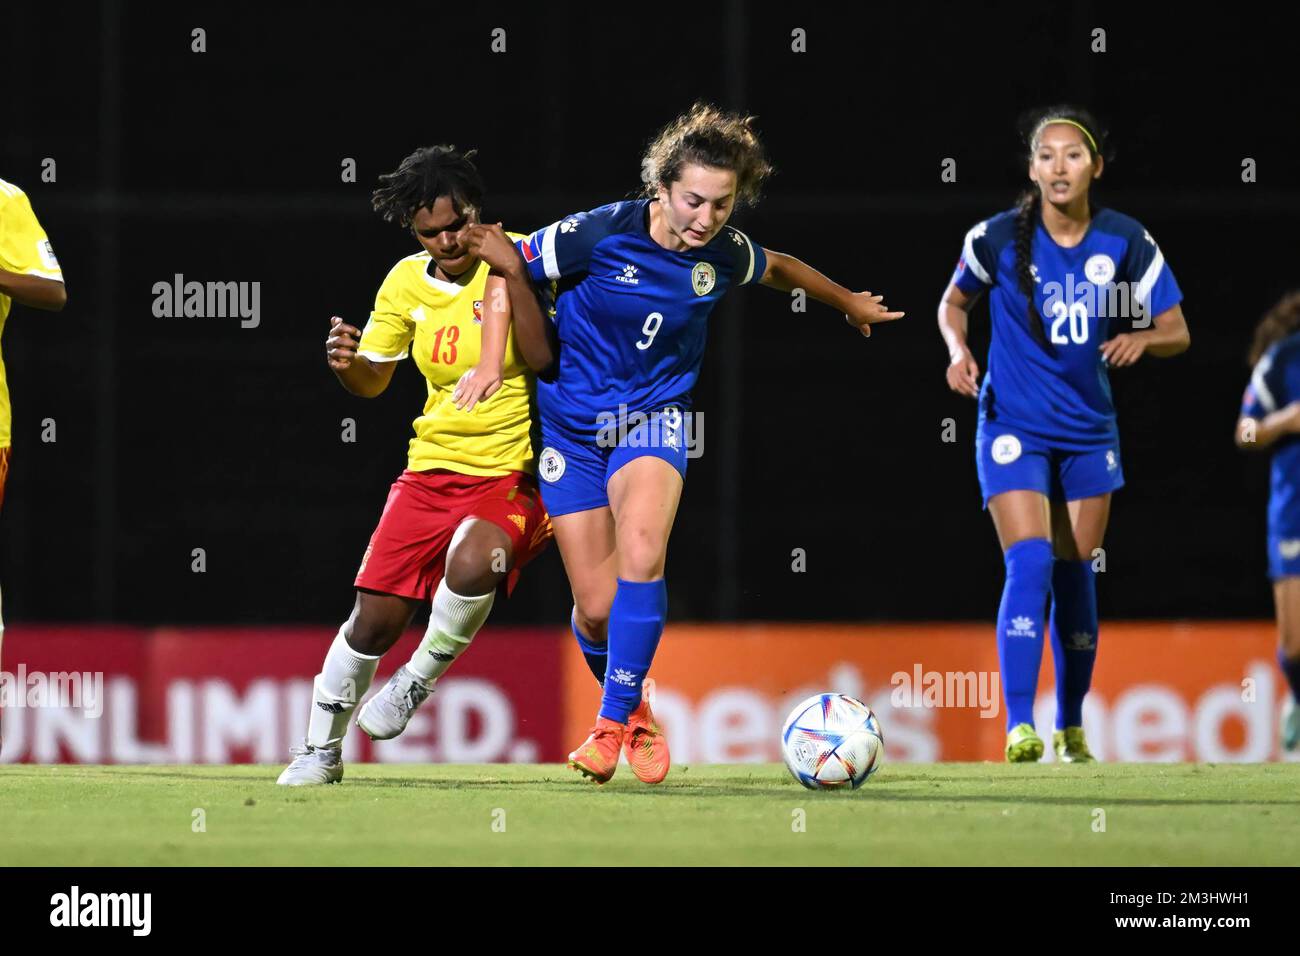 Sydney, Australia. 15th Dec, 2022. Ramona Padio (L) of Papua New Guinea and Isabella Victoria Flanigan (R) of the Philippine women's soccer team are seen during the Philippines vs Papua New Guinea friendly match game held at the Western Sydney Wanderers Football Park. (Final score Philippines 9:0 Papua New Guinea). Credit: SOPA Images Limited/Alamy Live News Stock Photo